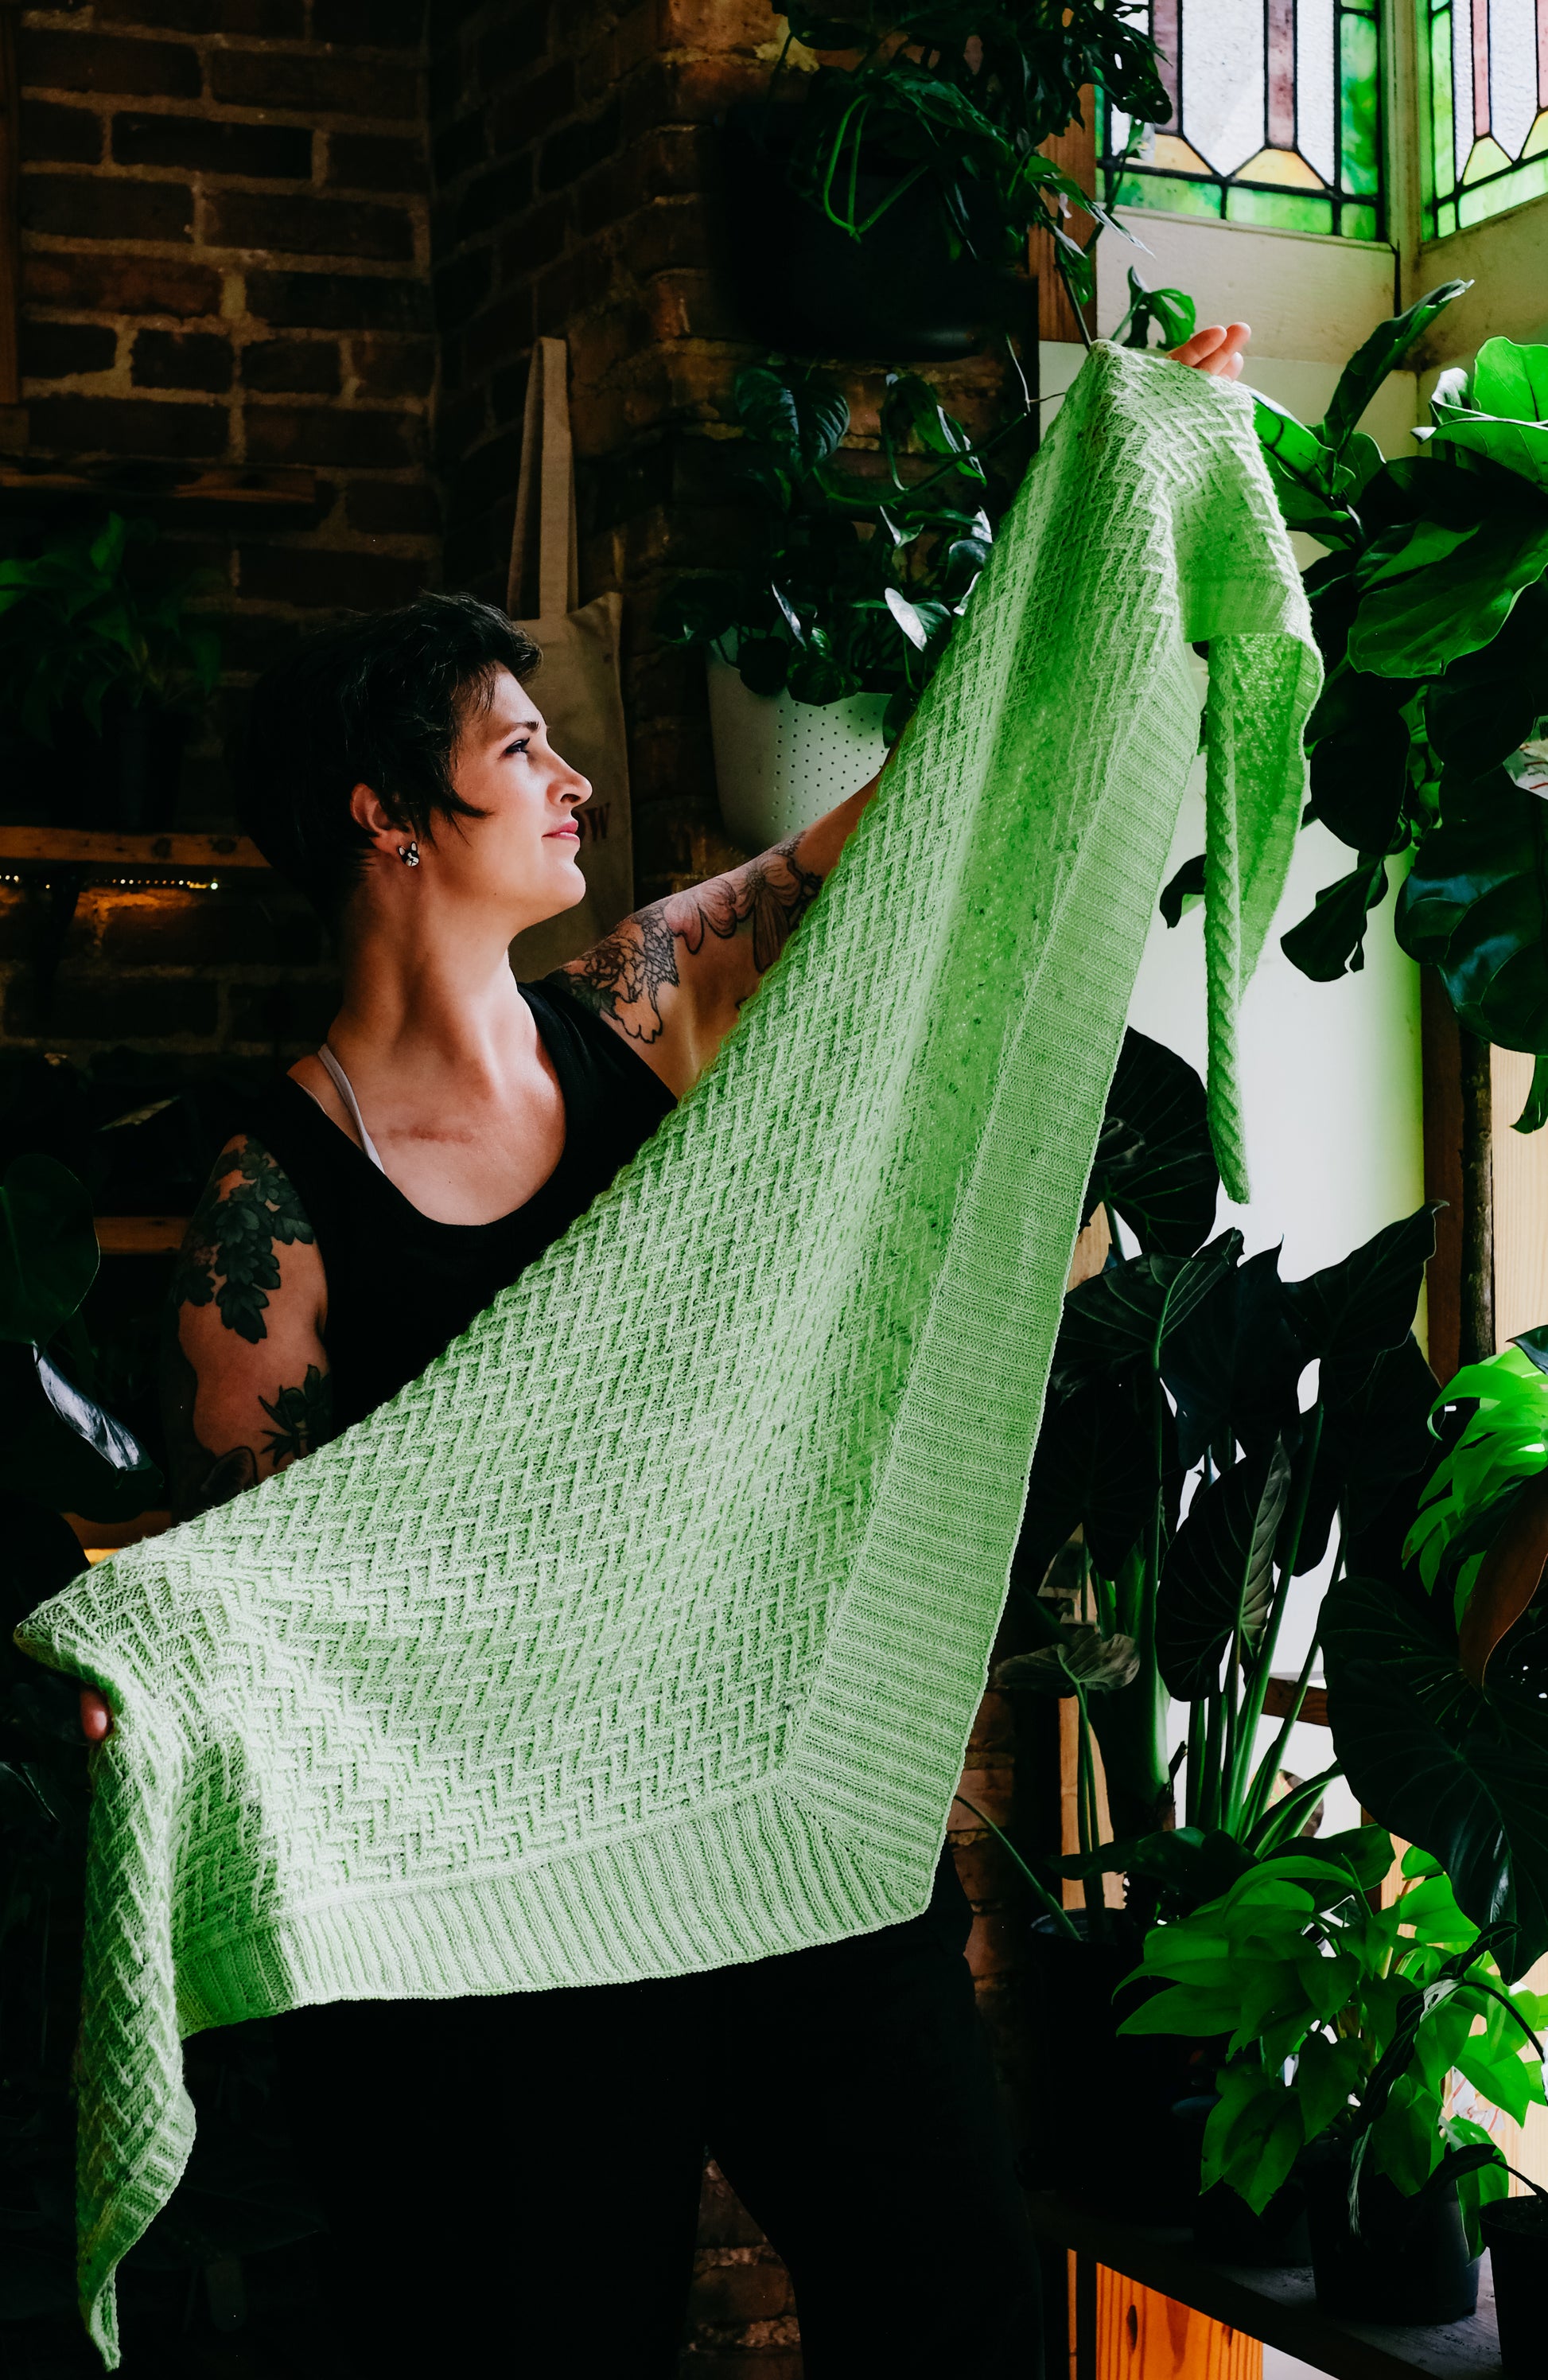 Jen holds open a asymmetric triangle shawl, knit with lime green yarn. The shawl has an all-over chevron stitch design with a ribbed edging on two sides of the triangle.